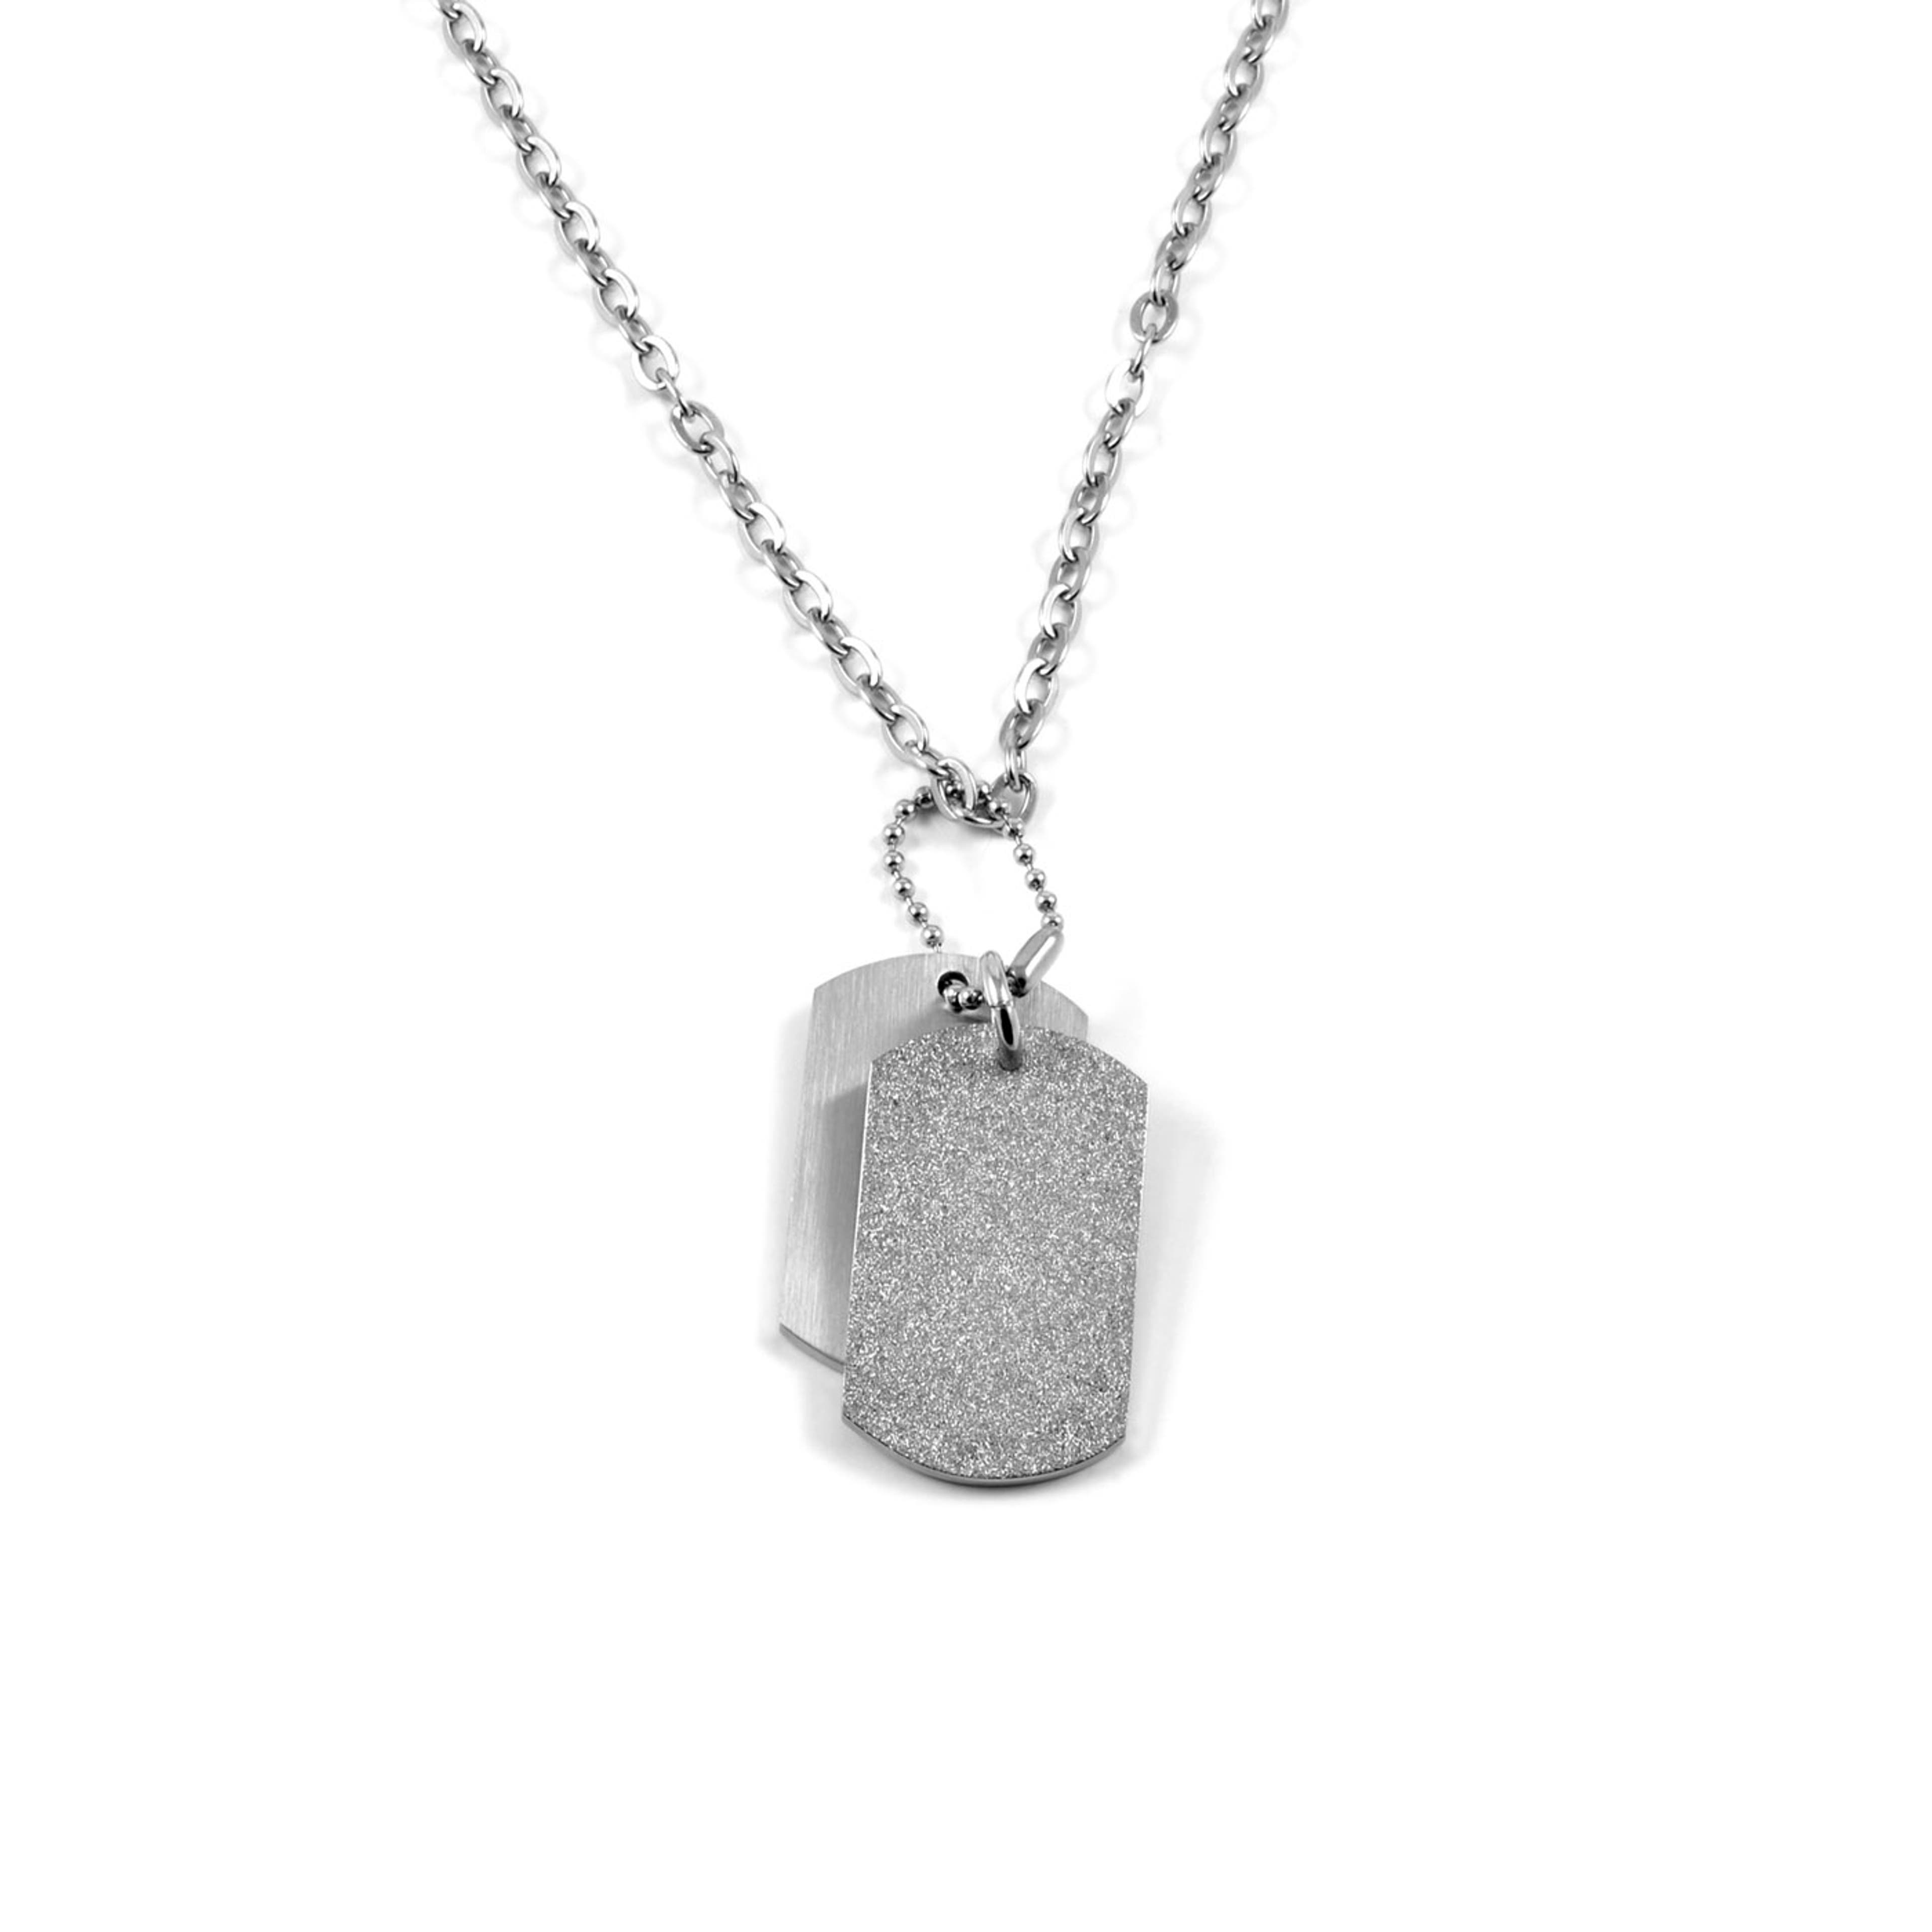 Dual Steel Dog Tag Necklace